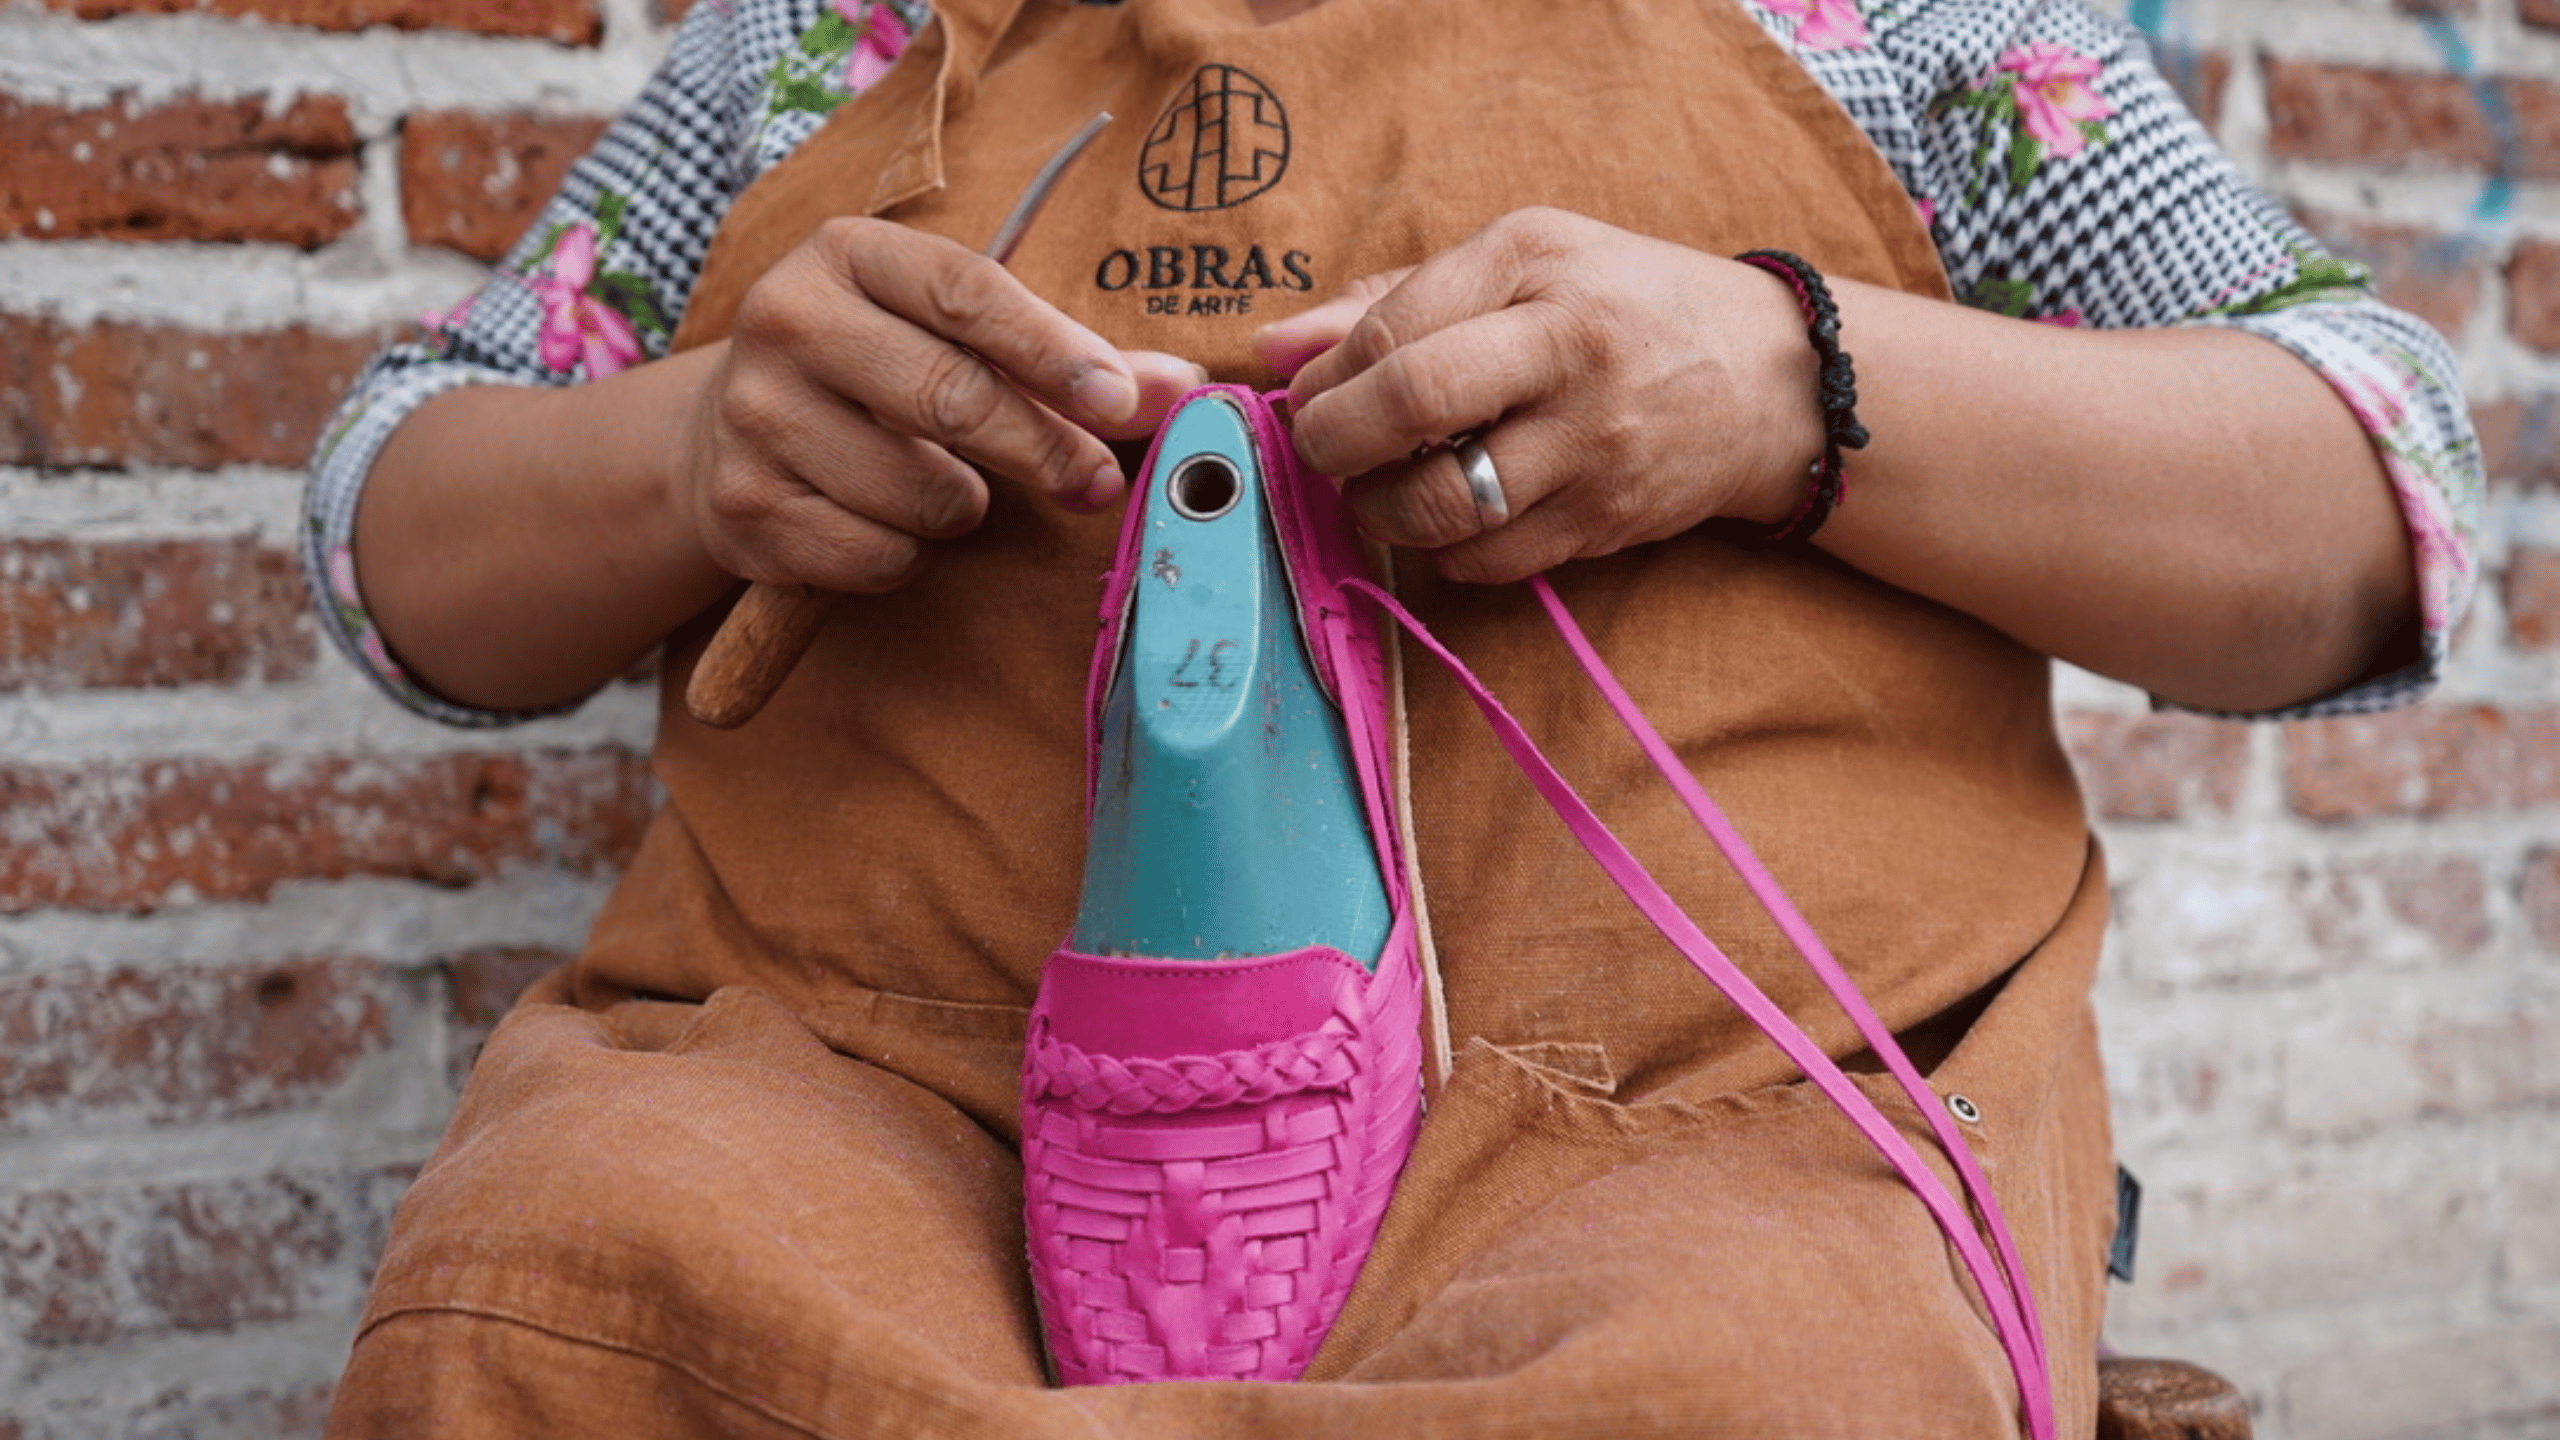 Load video: The making of the Obras Loafer